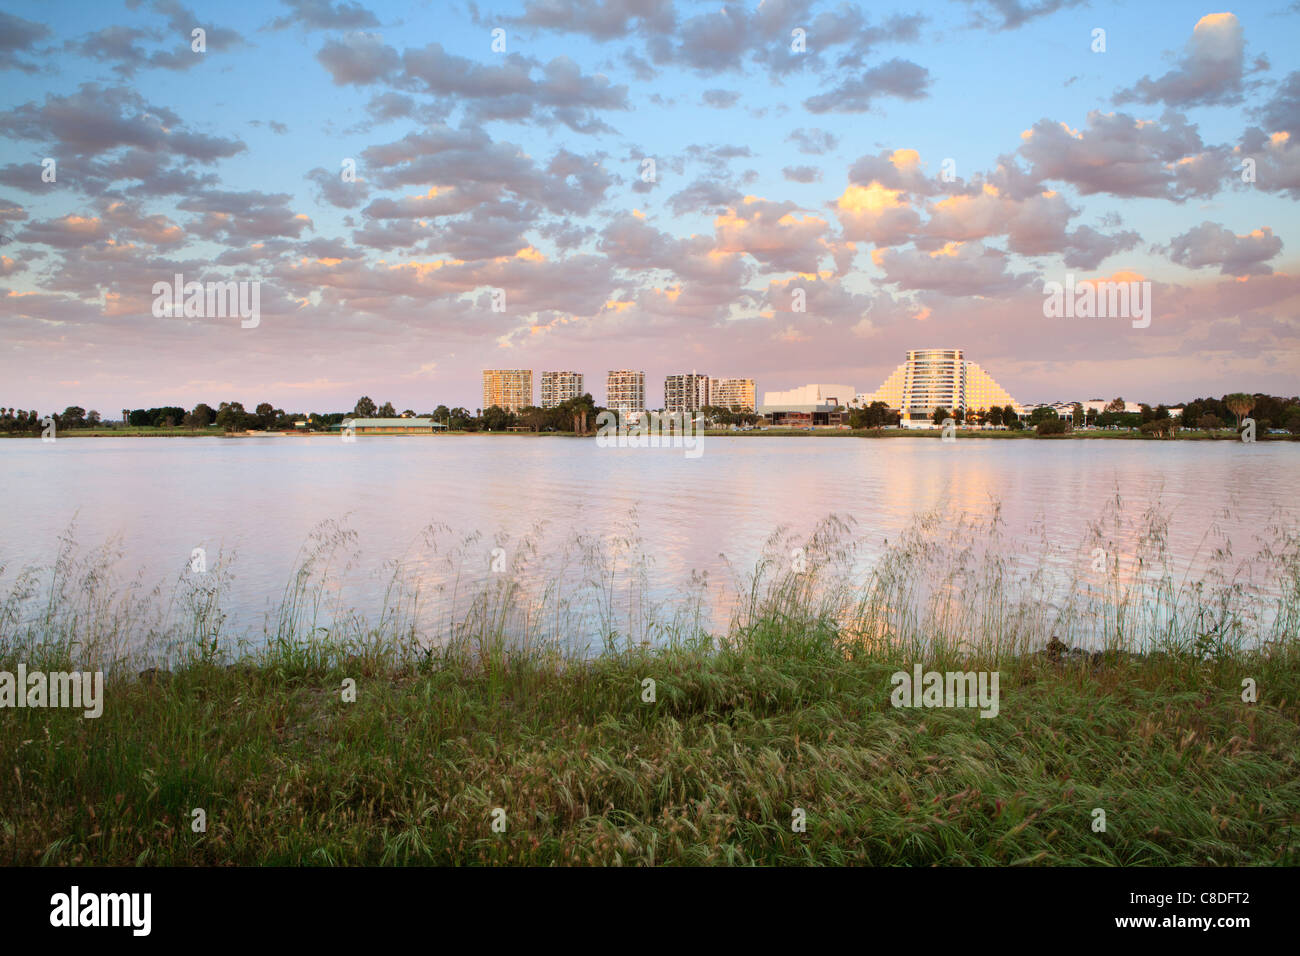 Burswood Entertainment Complex and Swan River at sunset. Taken from Heirisson Island. Perth, Western Australia Stock Photo